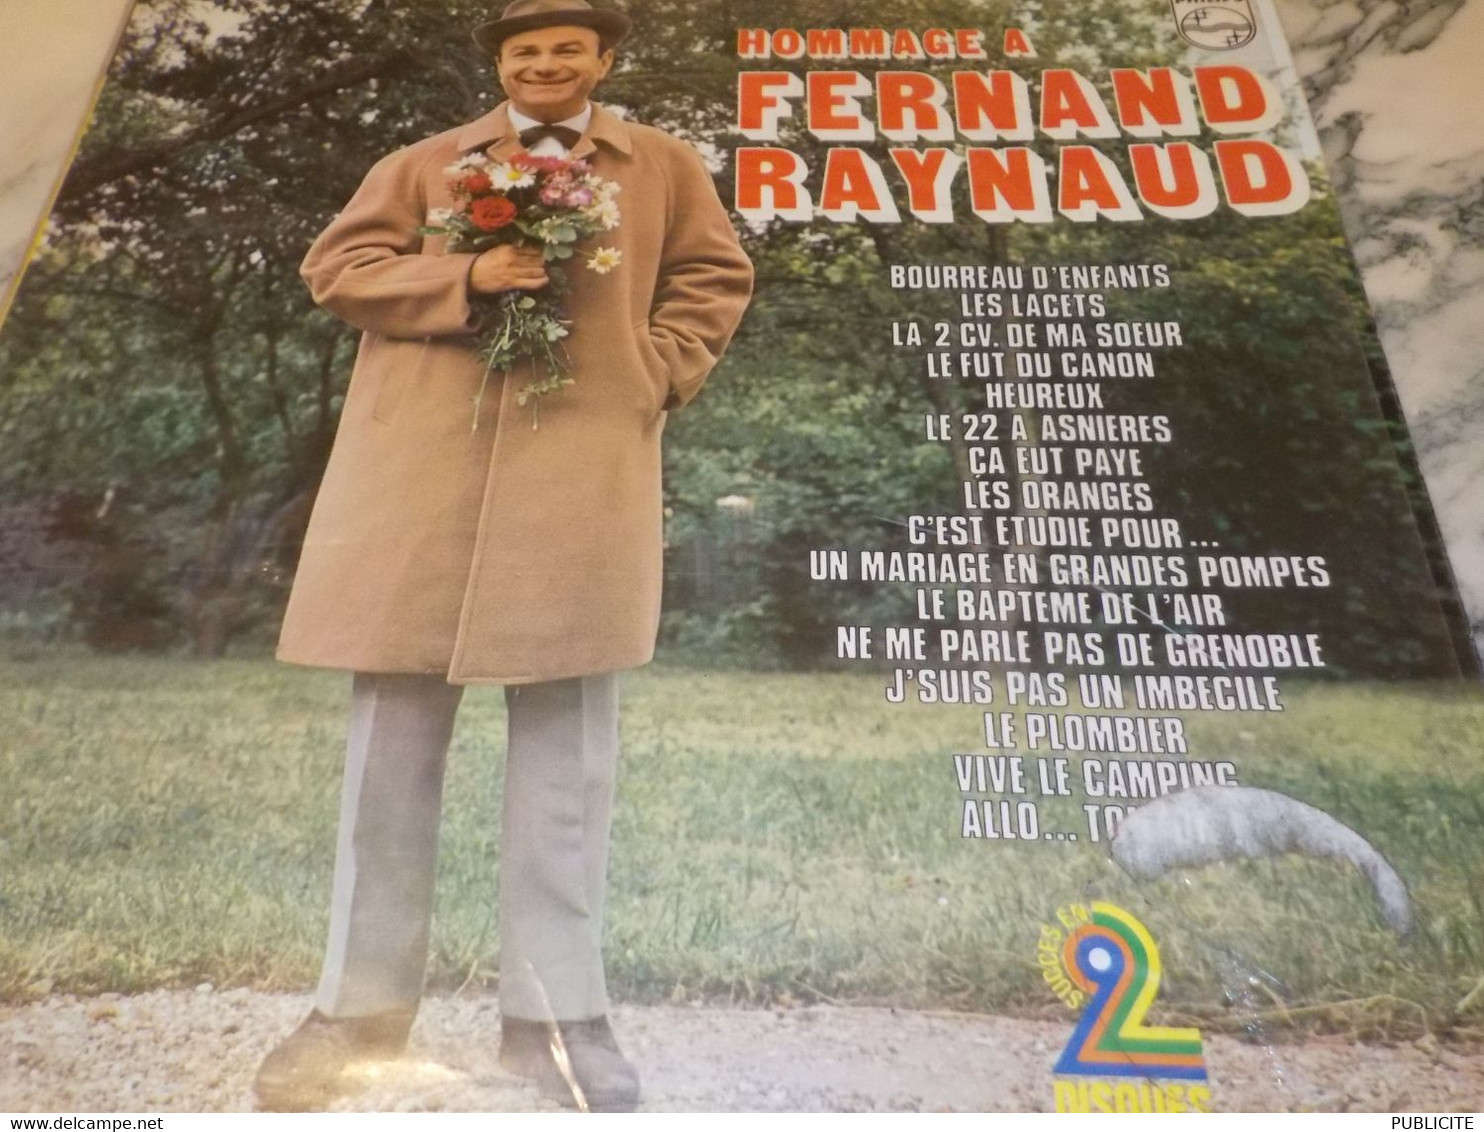 2 DISQUE 33 TOURS HOMMAGE A FERNAND RAYNAUD 1983 - Humour, Cabaret